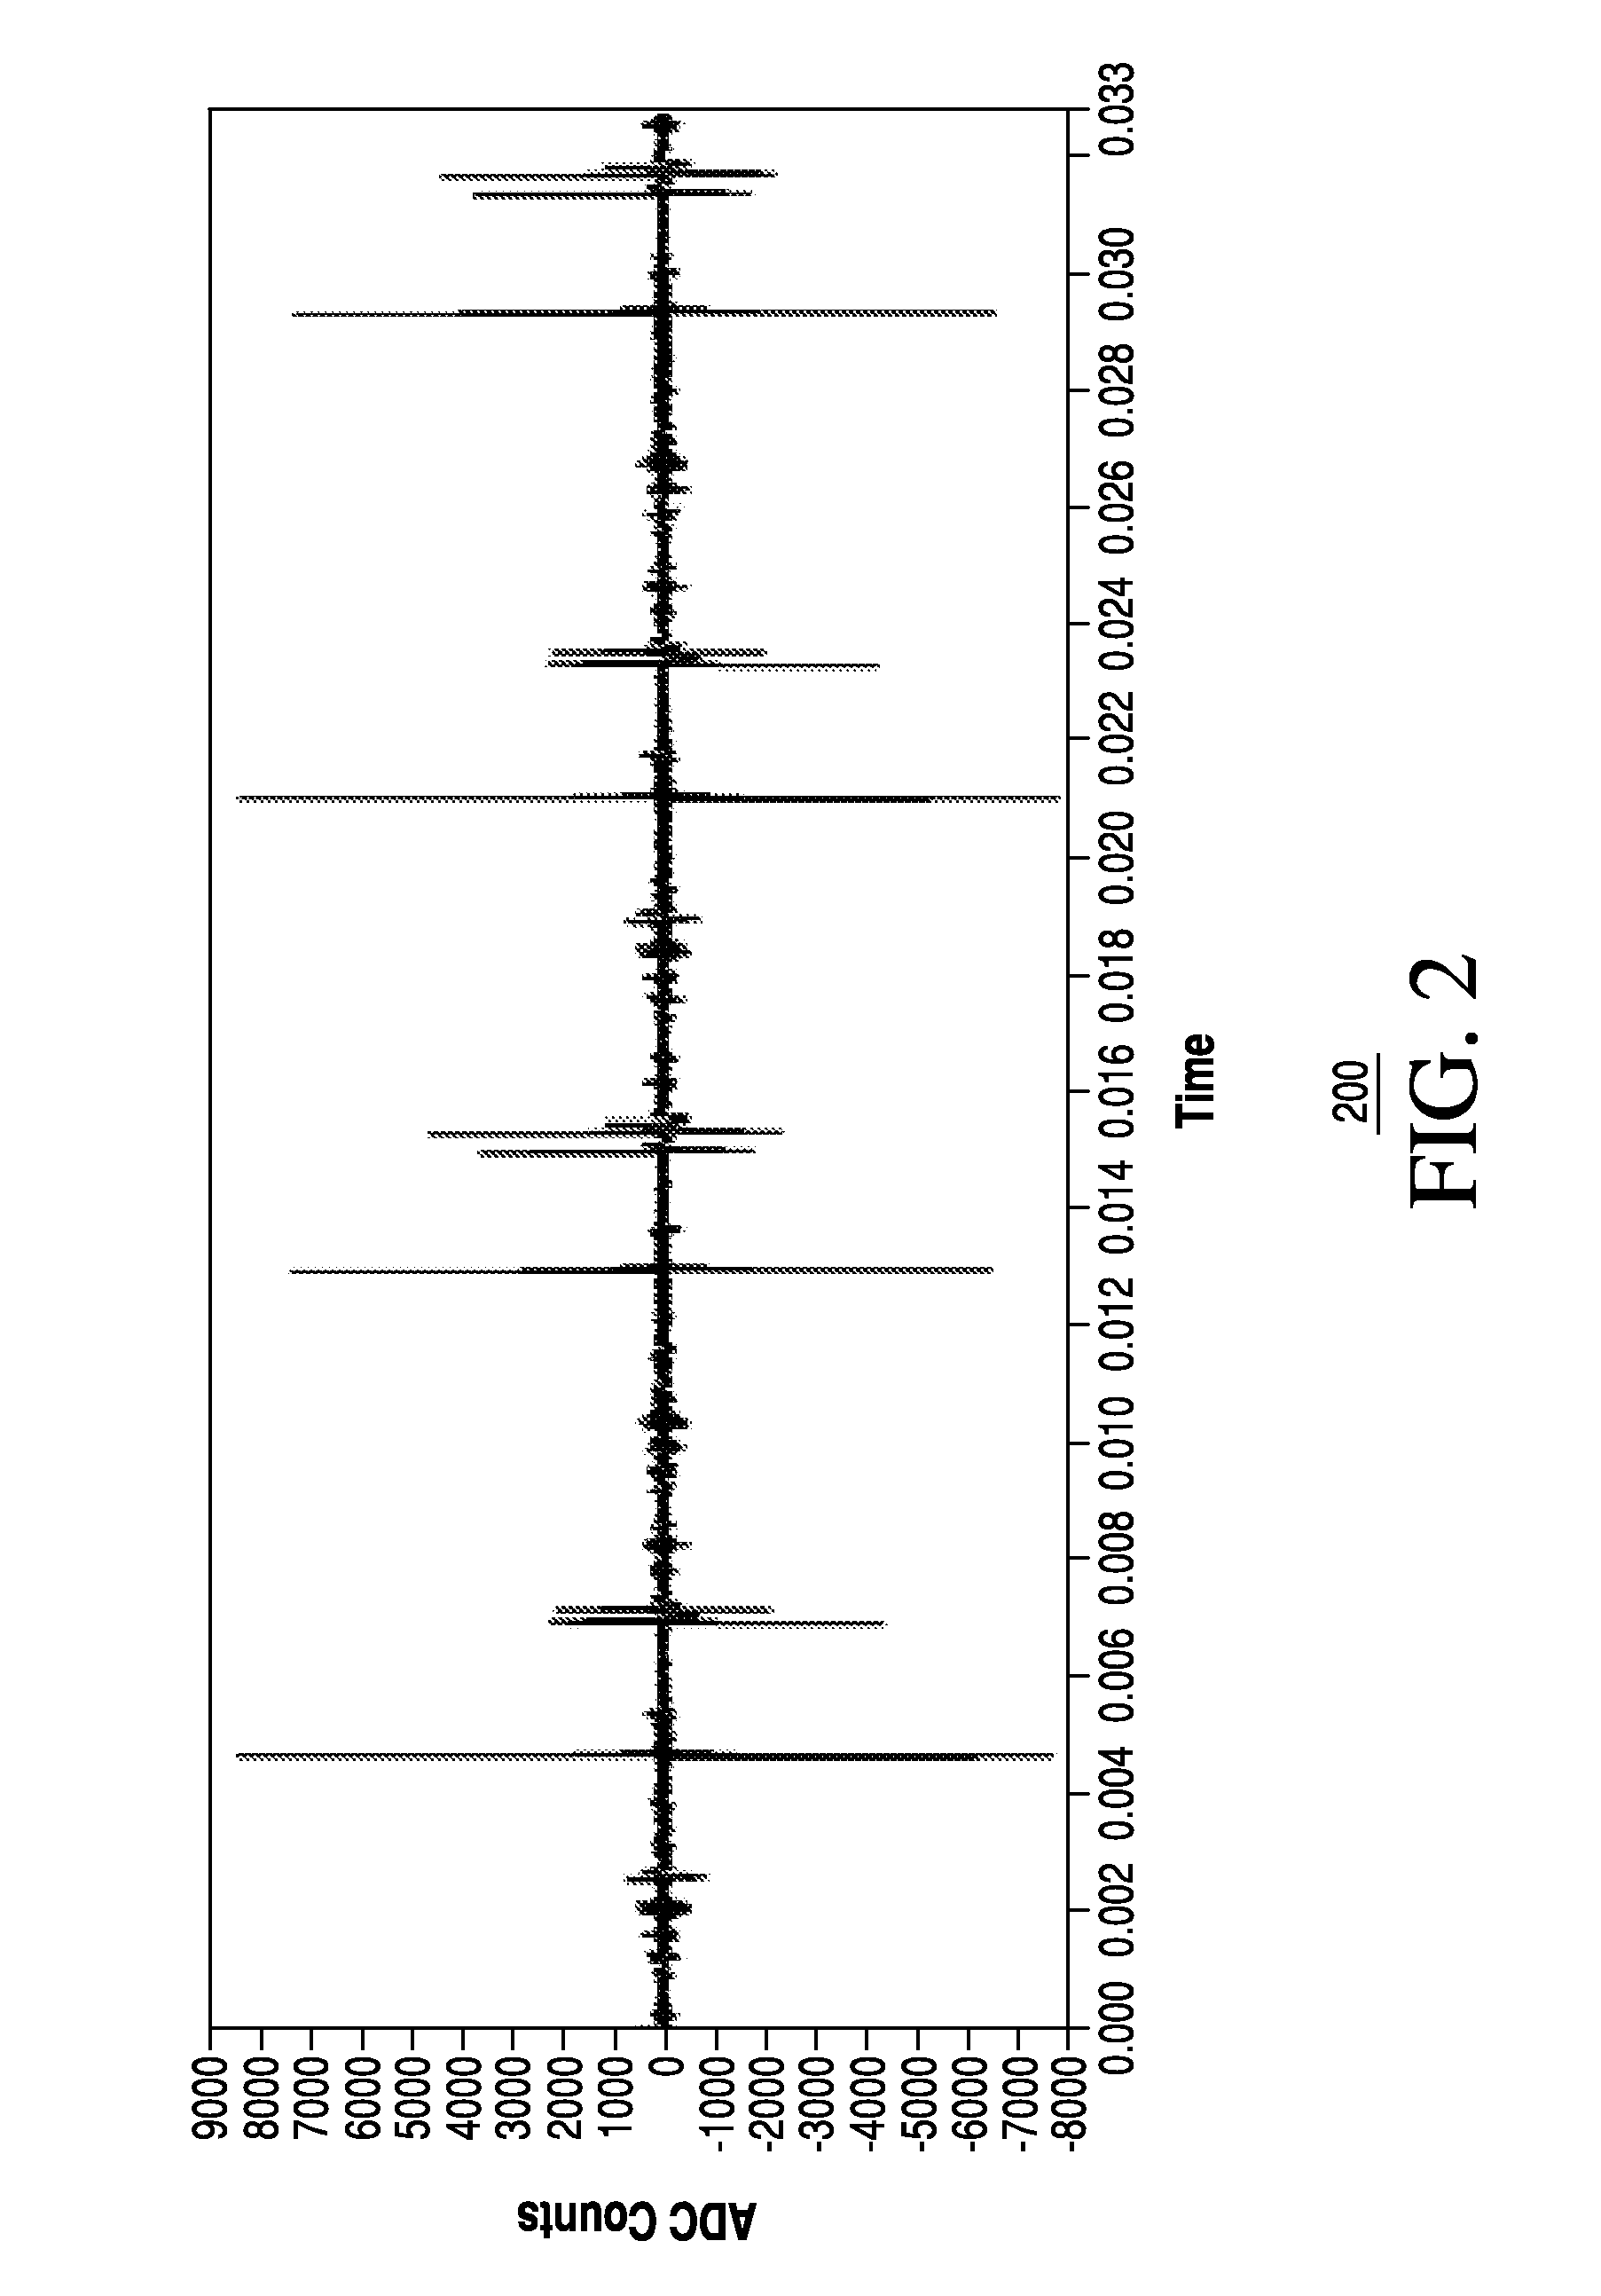 Systems and methods to isolate lower amplitude signals for analysis in the presence of large amplitude transients